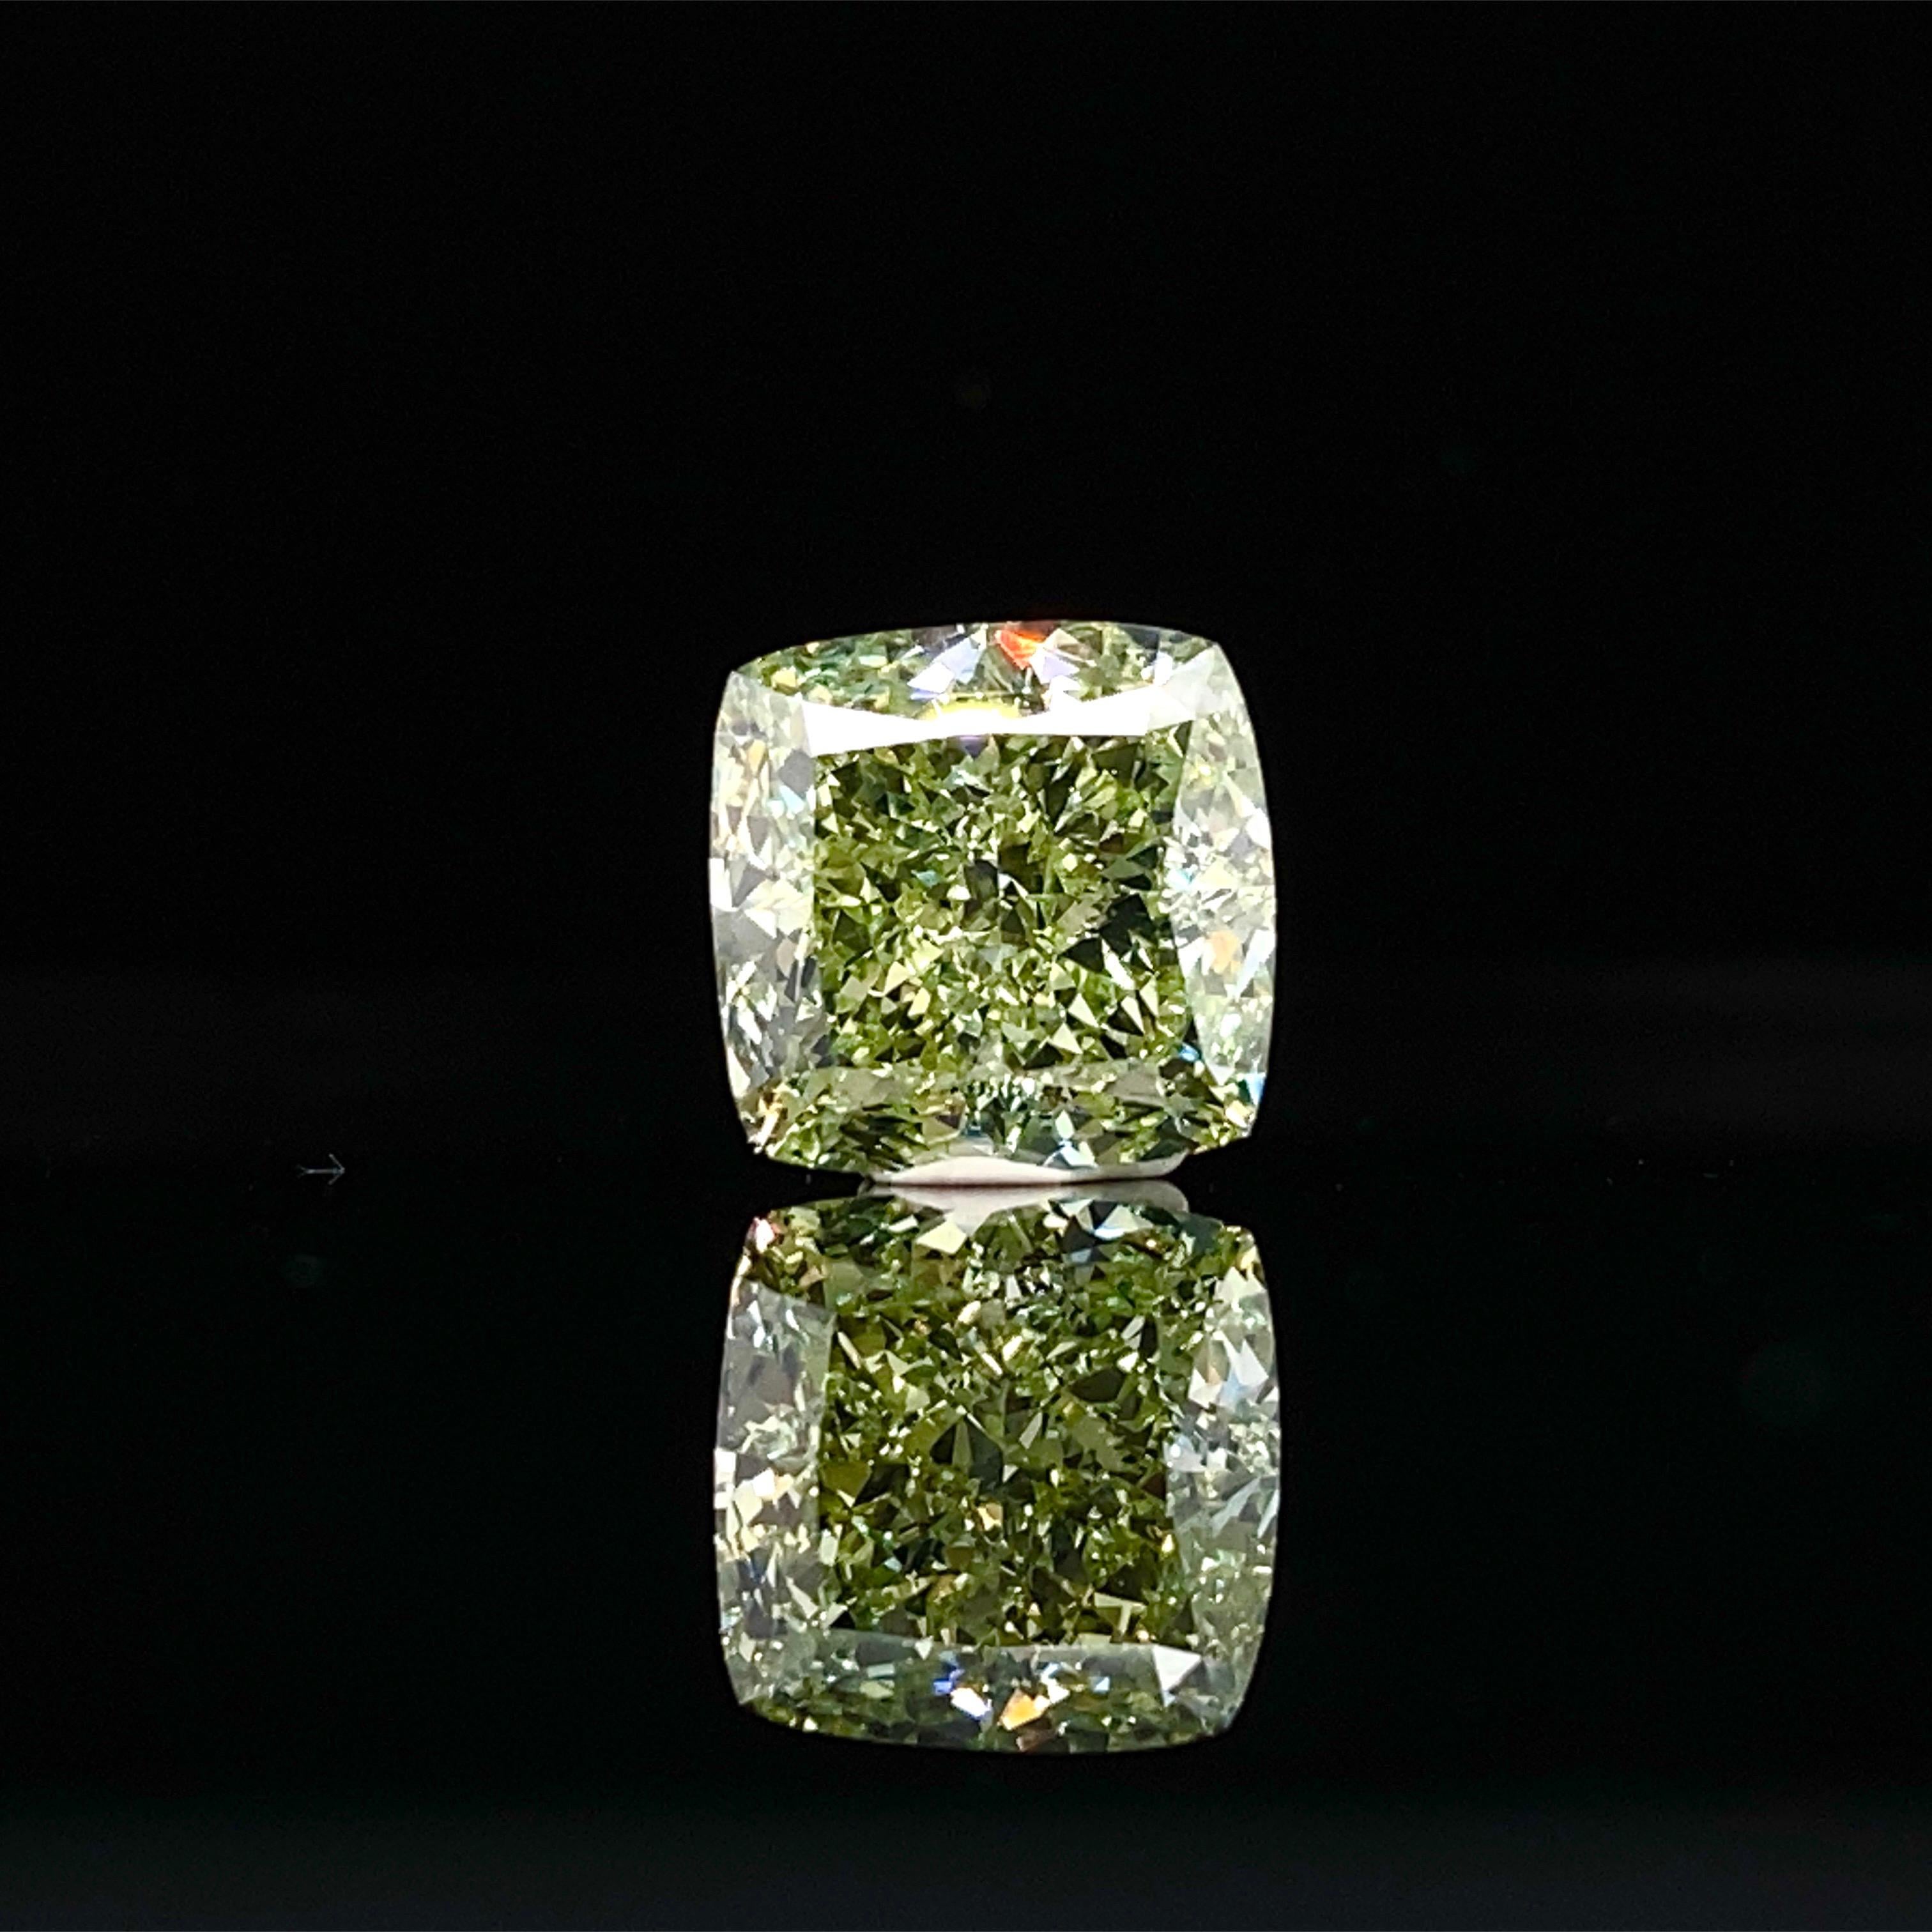 From the museum vault at Emilio Jewelry New York,

Featuring a loose memorizing Gia certified natural fancy yellow green diamond. The color is very strong and vibrant. The diamond is also excellent clarity. Please inquire for more details. All